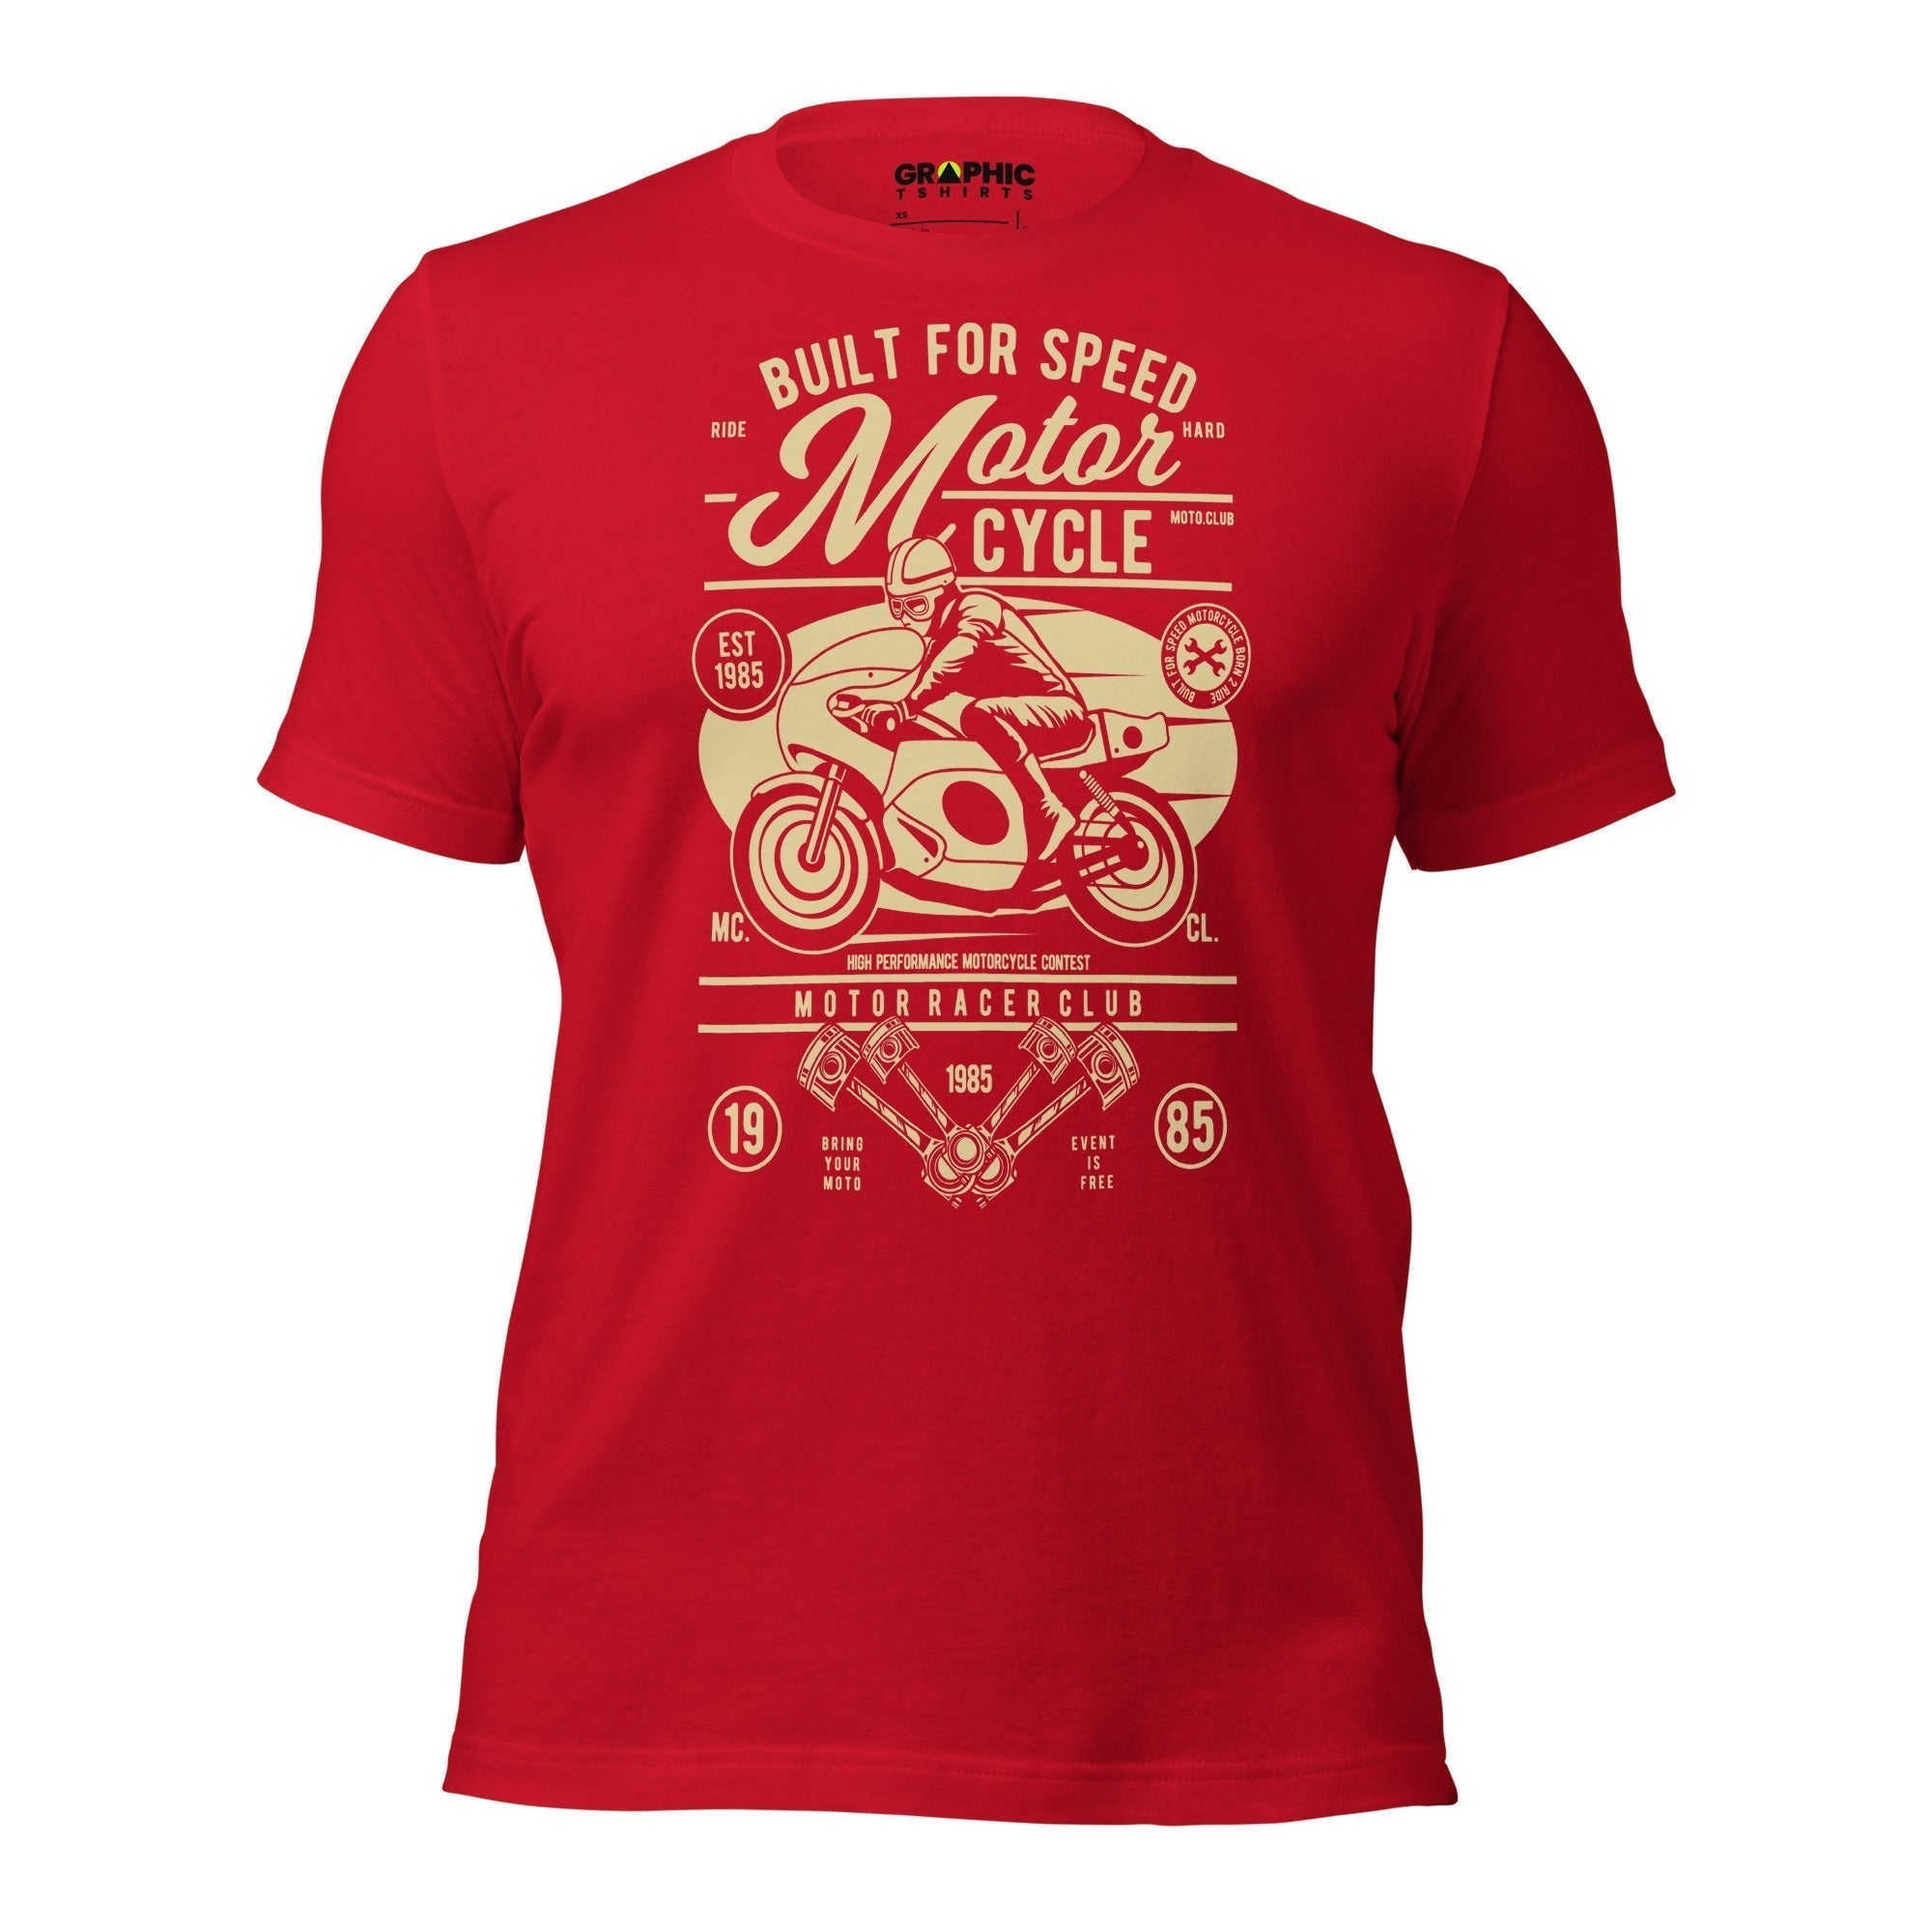 Unisex Staple T-Shirt - Motorcycle Built For Speed Ride Hard Motor Racer Club Est 1985 - GRAPHIC T-SHIRTS